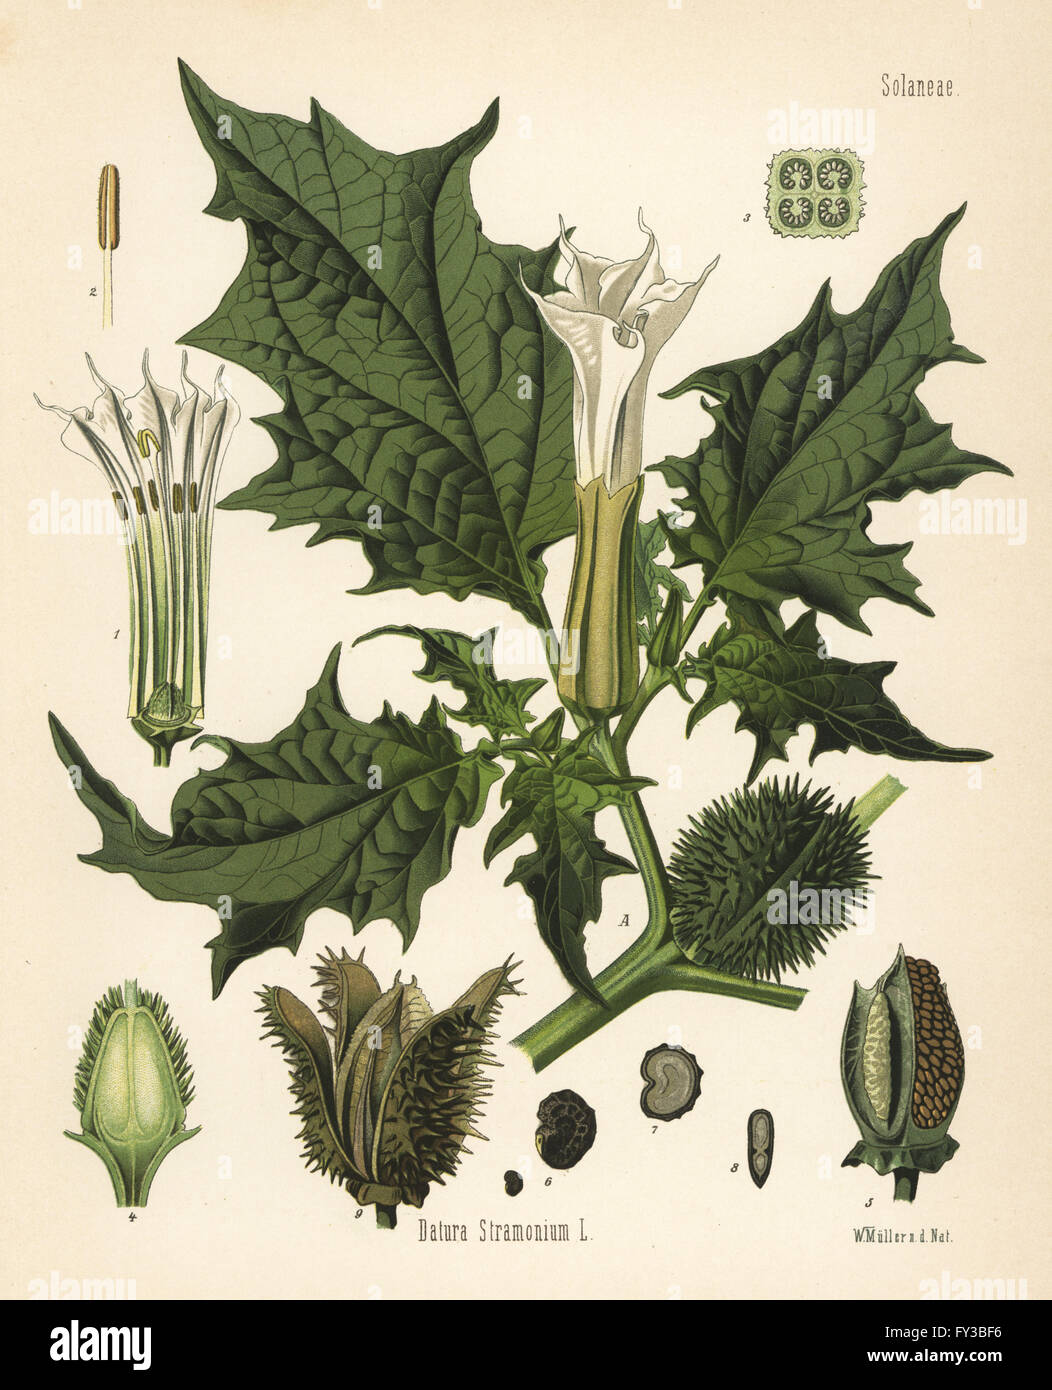 Jimson weed, Datura stramonium. Chromolithograph after a botanical illustration by Walther Muller from Hermann Adolph Koehler's Medicinal Plants, edited by Gustav Pabst, Koehler, Germany, 1887. Stock Photo